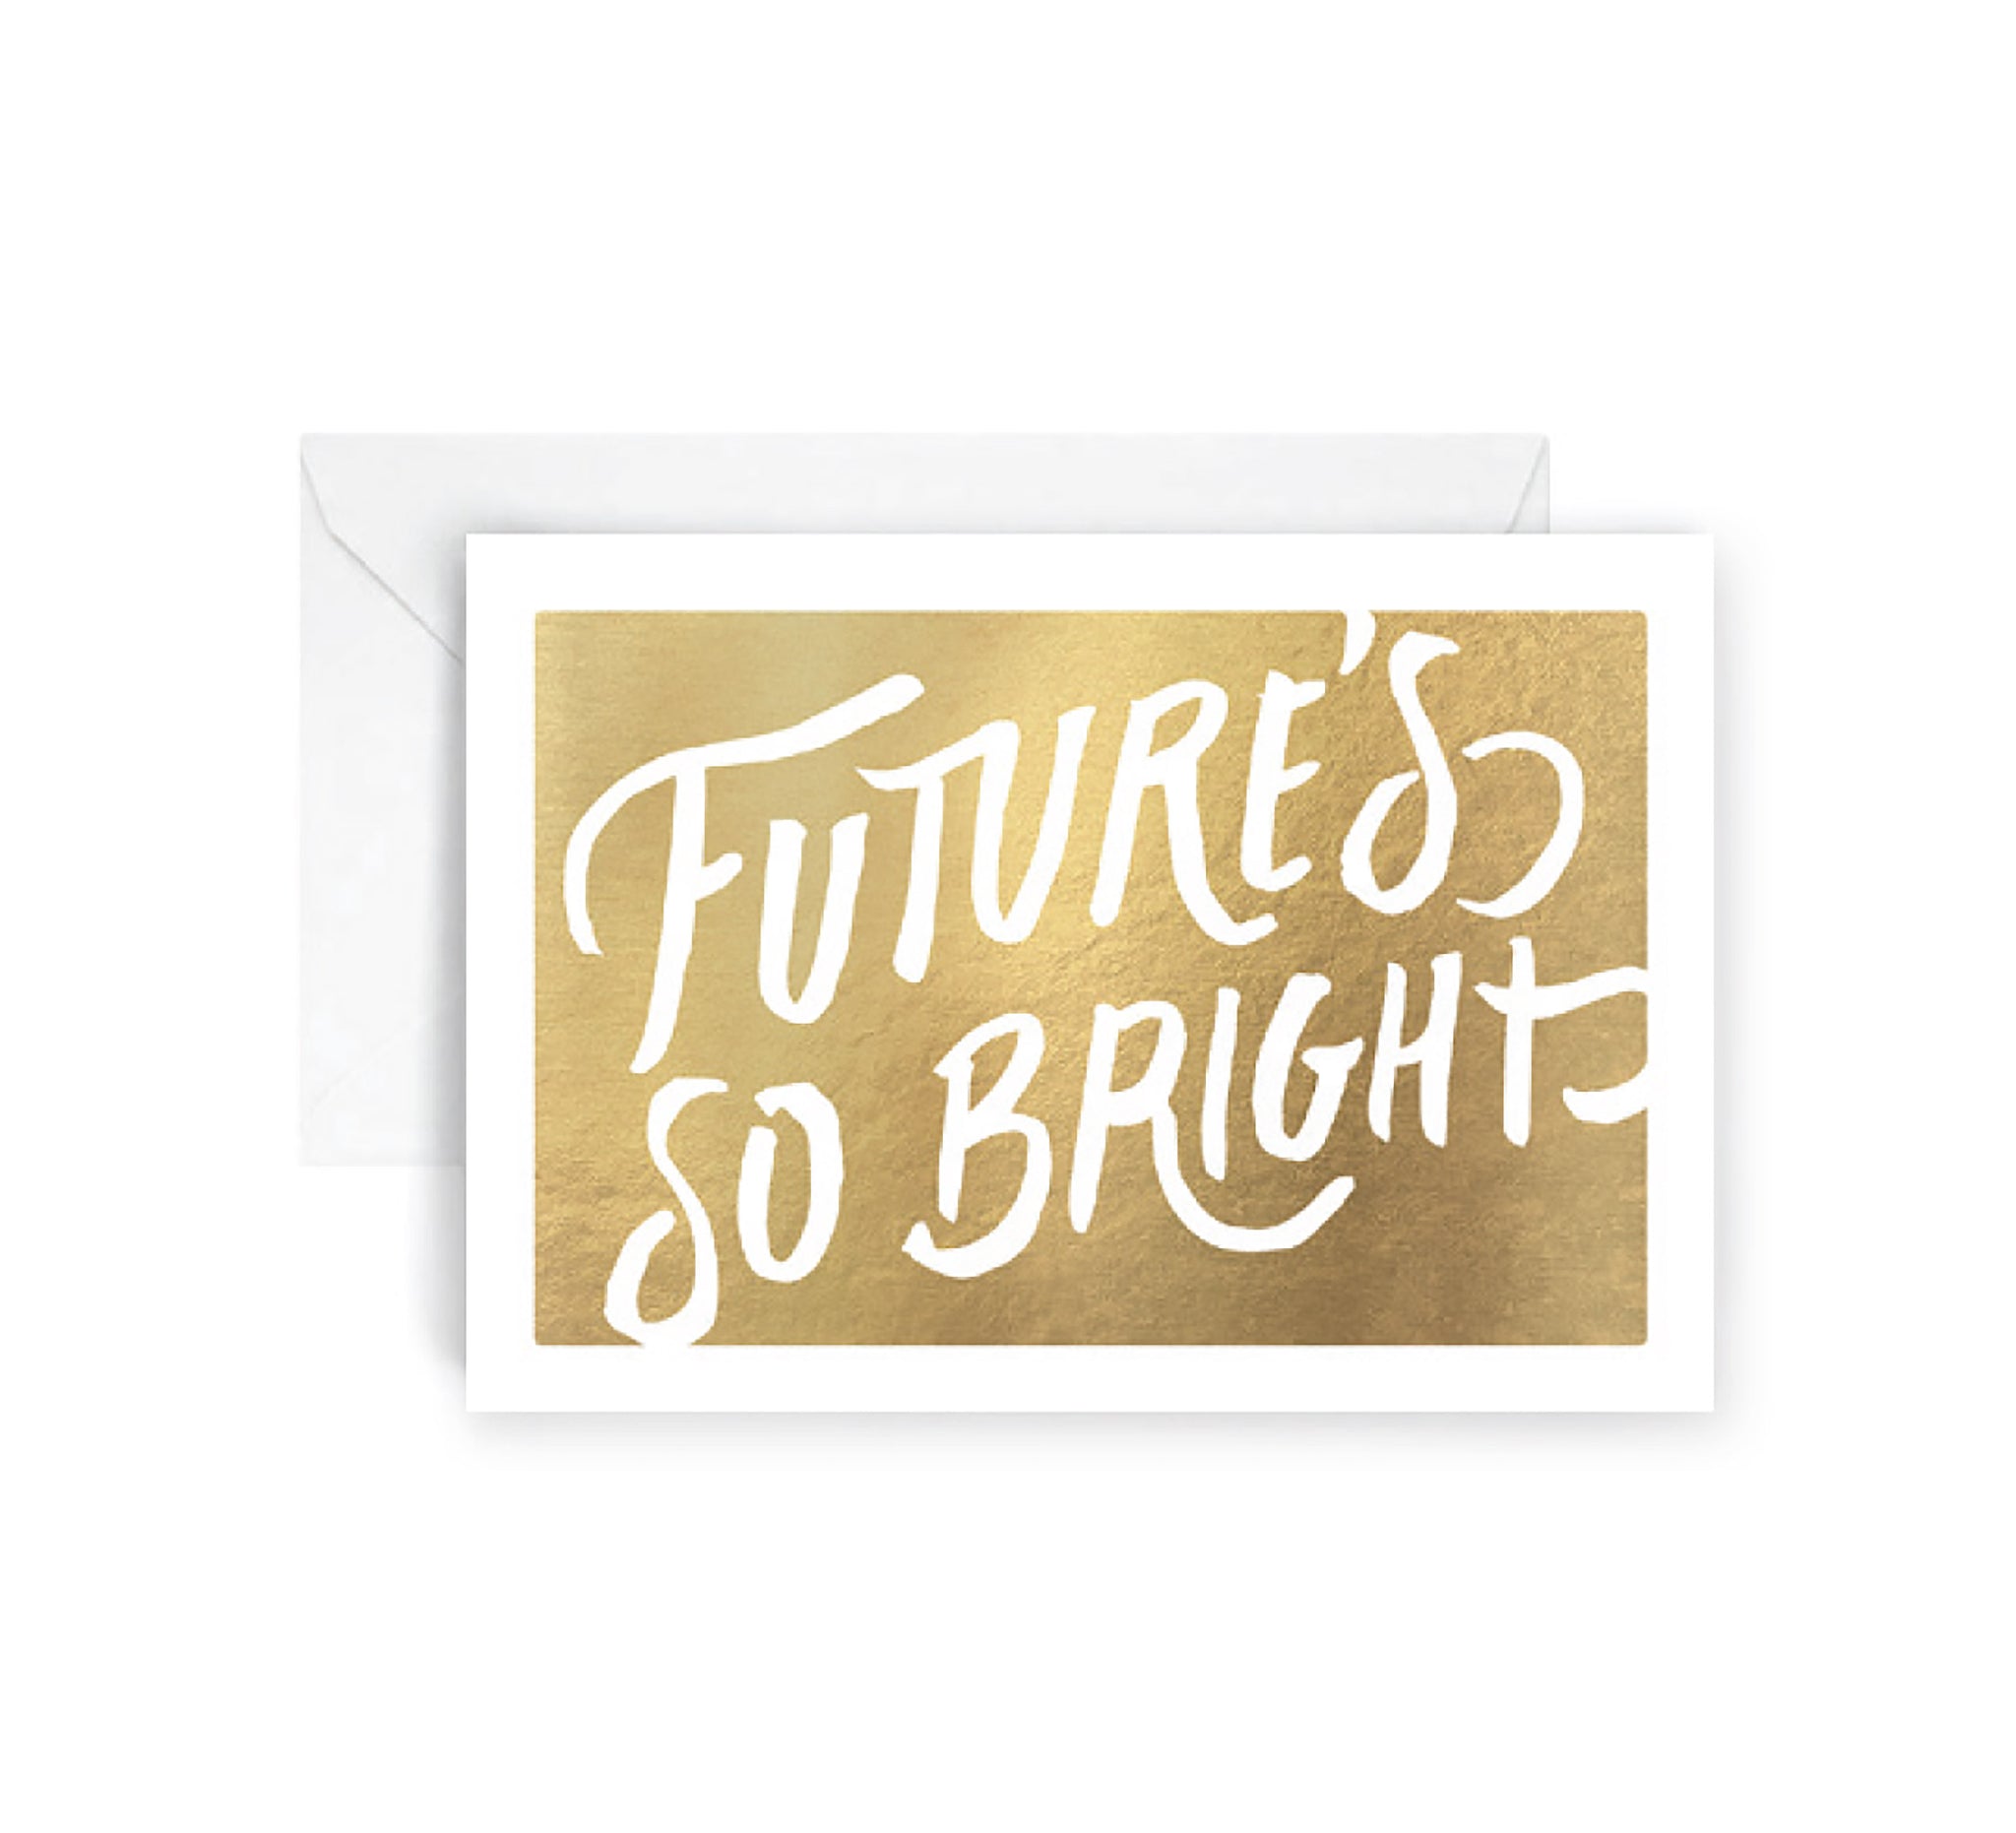 13. FUTURE CARDS - (PACK OF 6)